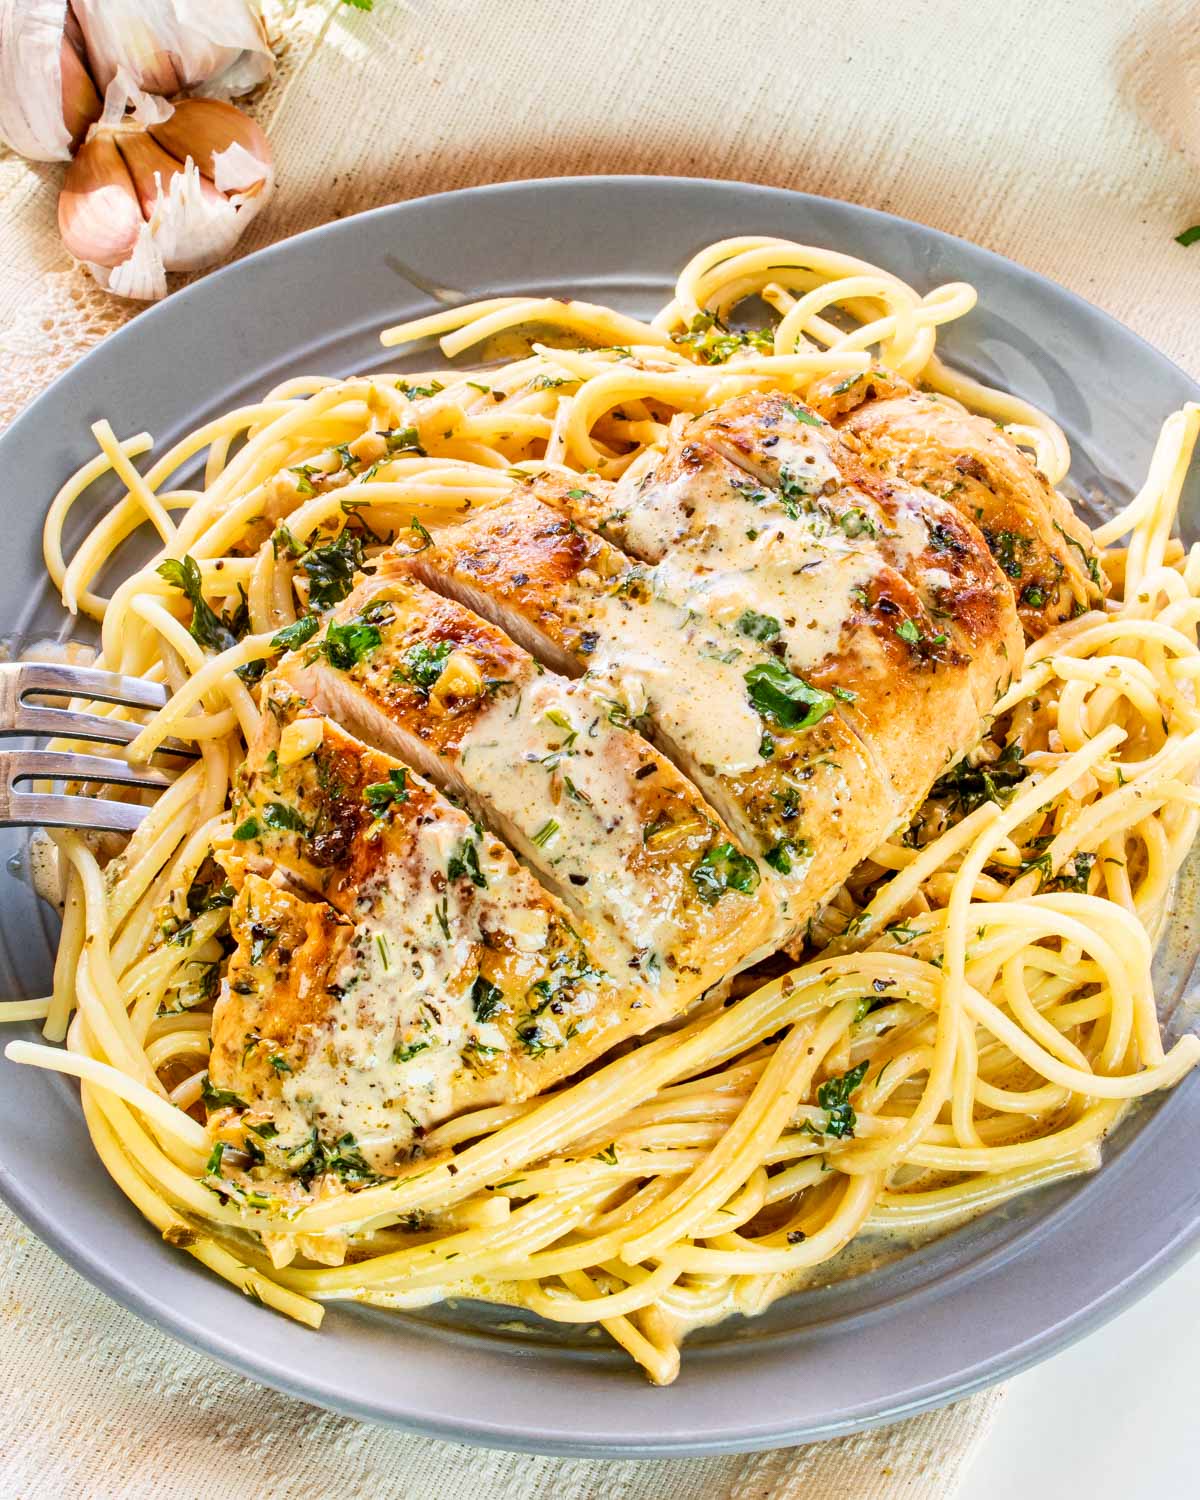 creamy herb chicken breast sliced up on a bed of spaghetti.